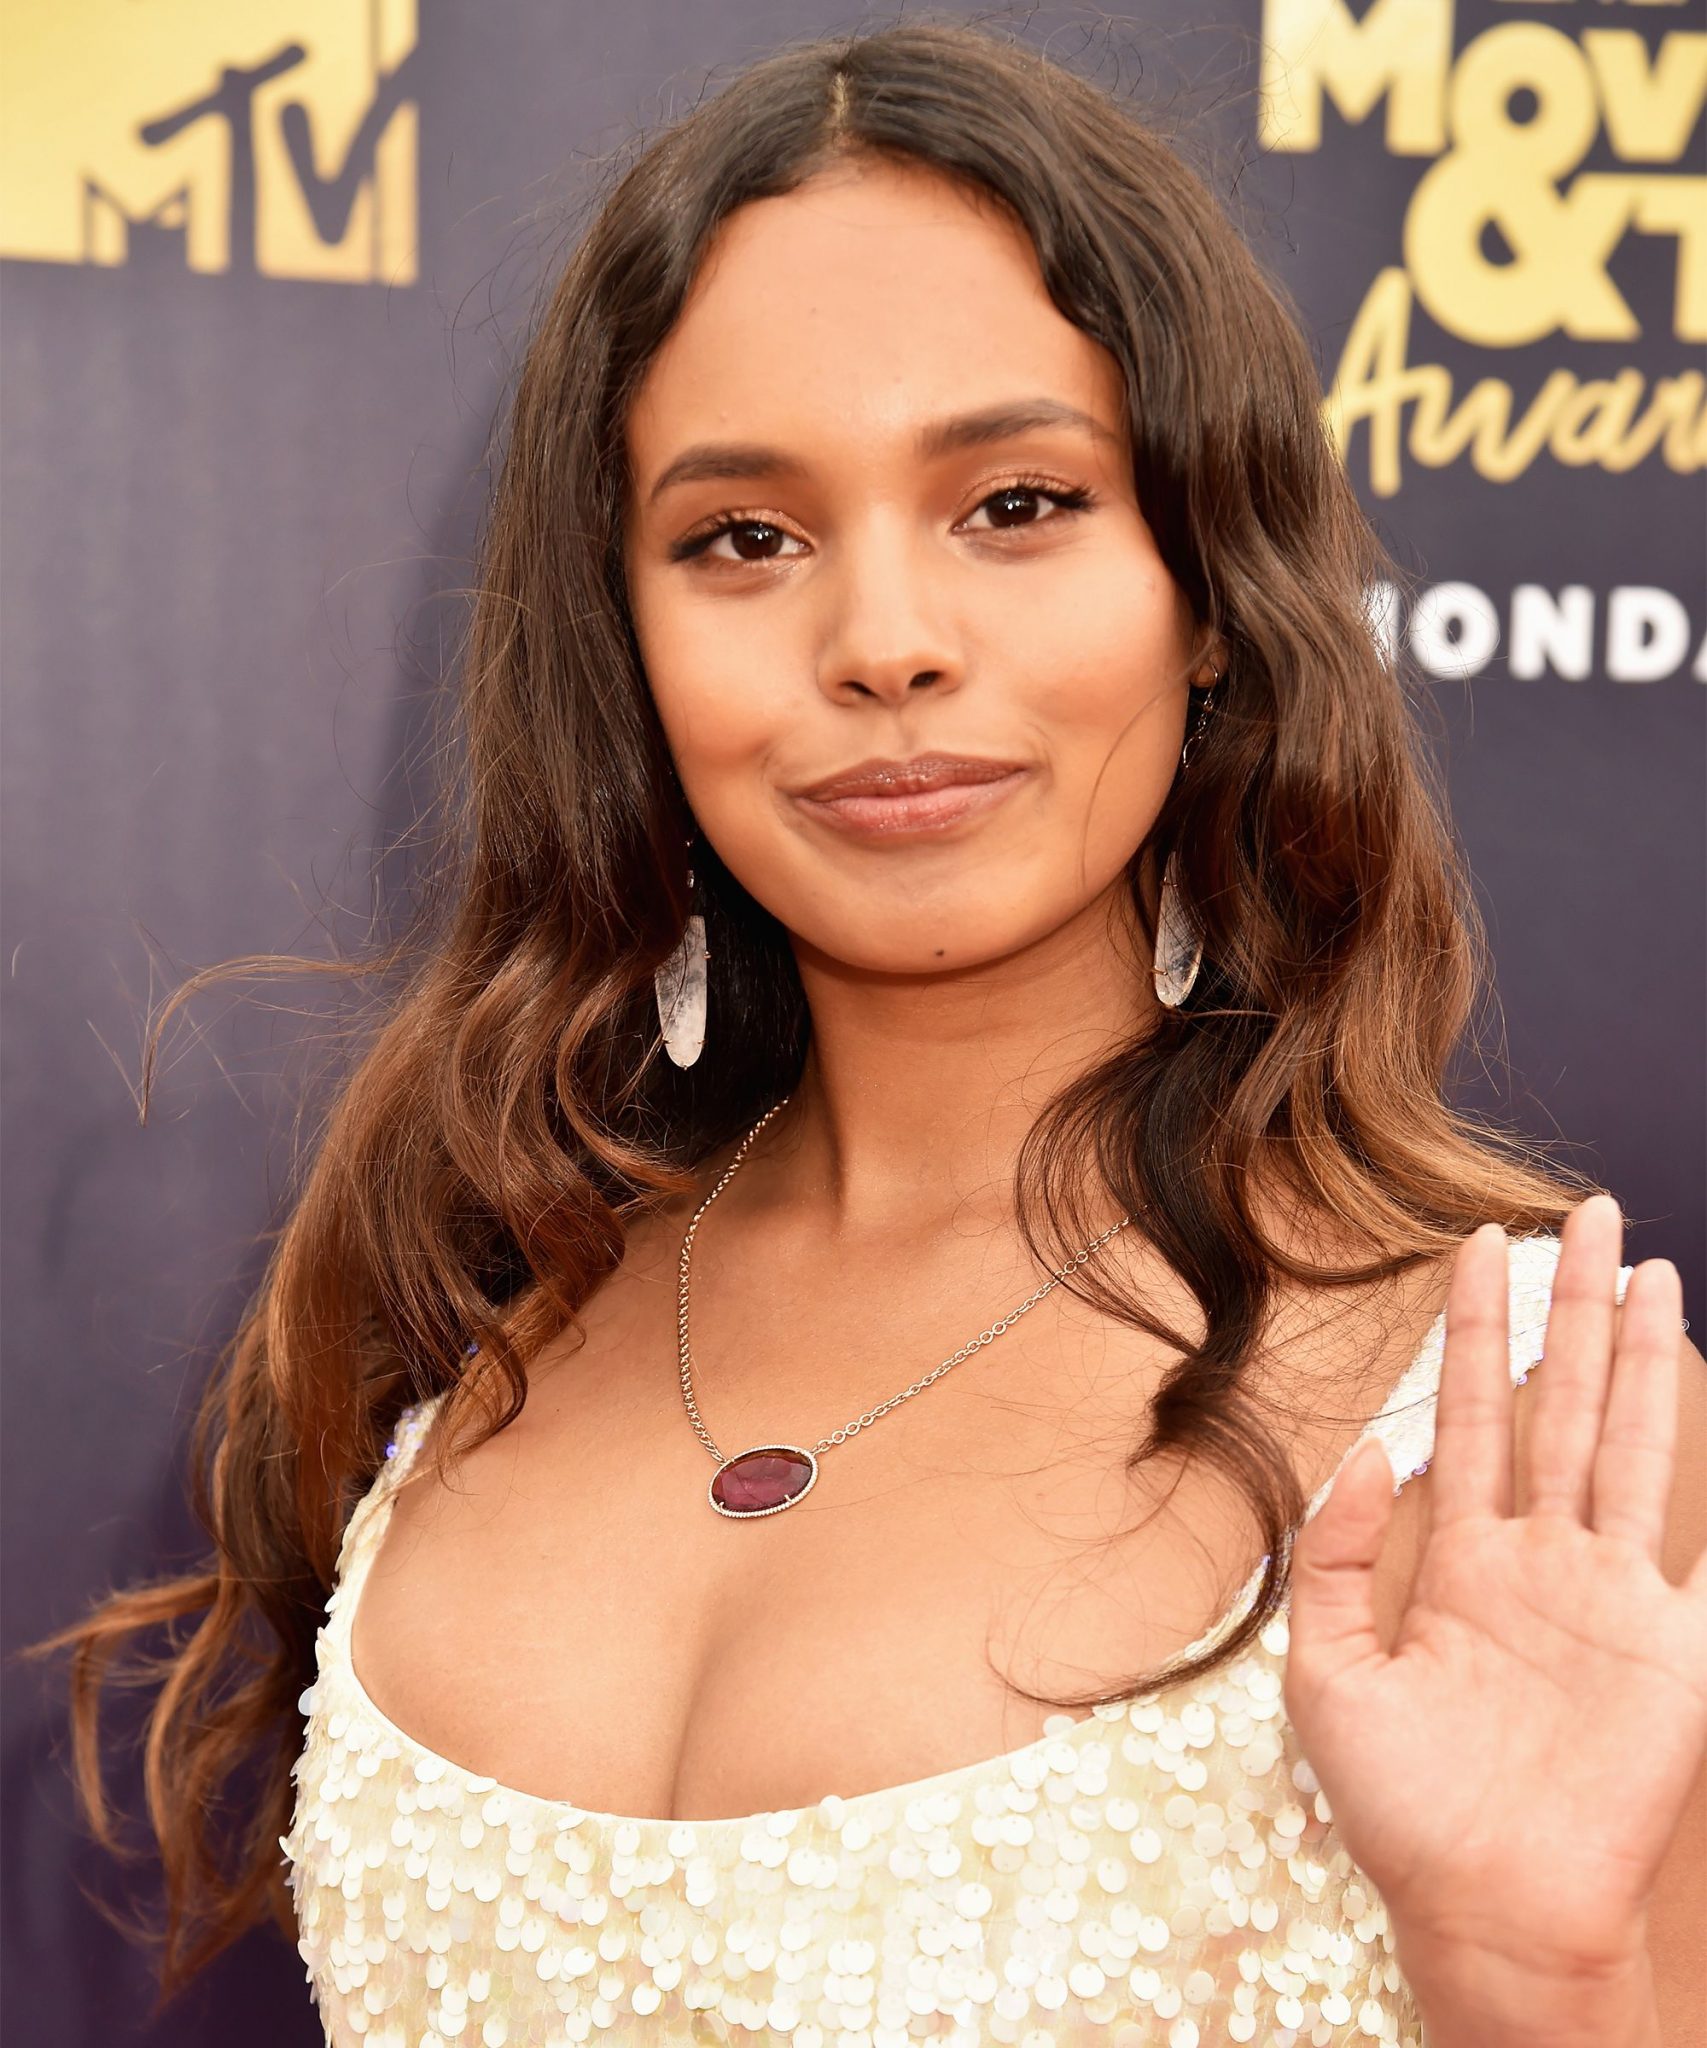 the best beauty looks from the mtv awards cost less than $15